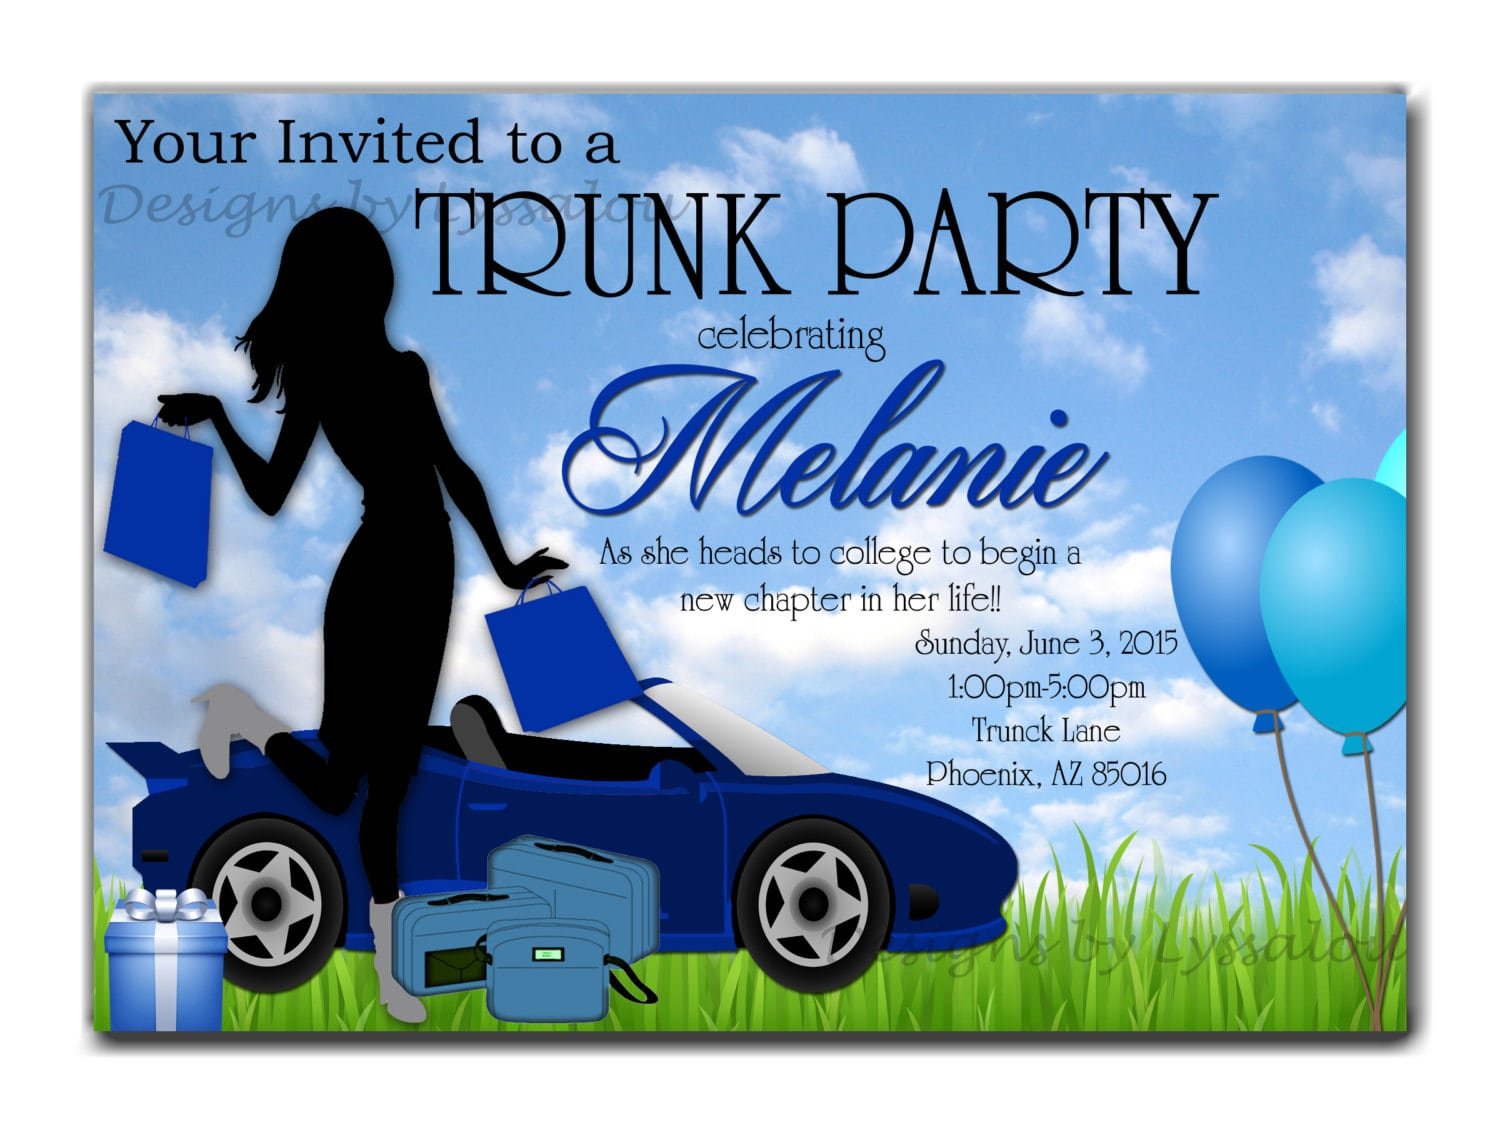 How To Select The Trunk Party Invitations Templates Designs